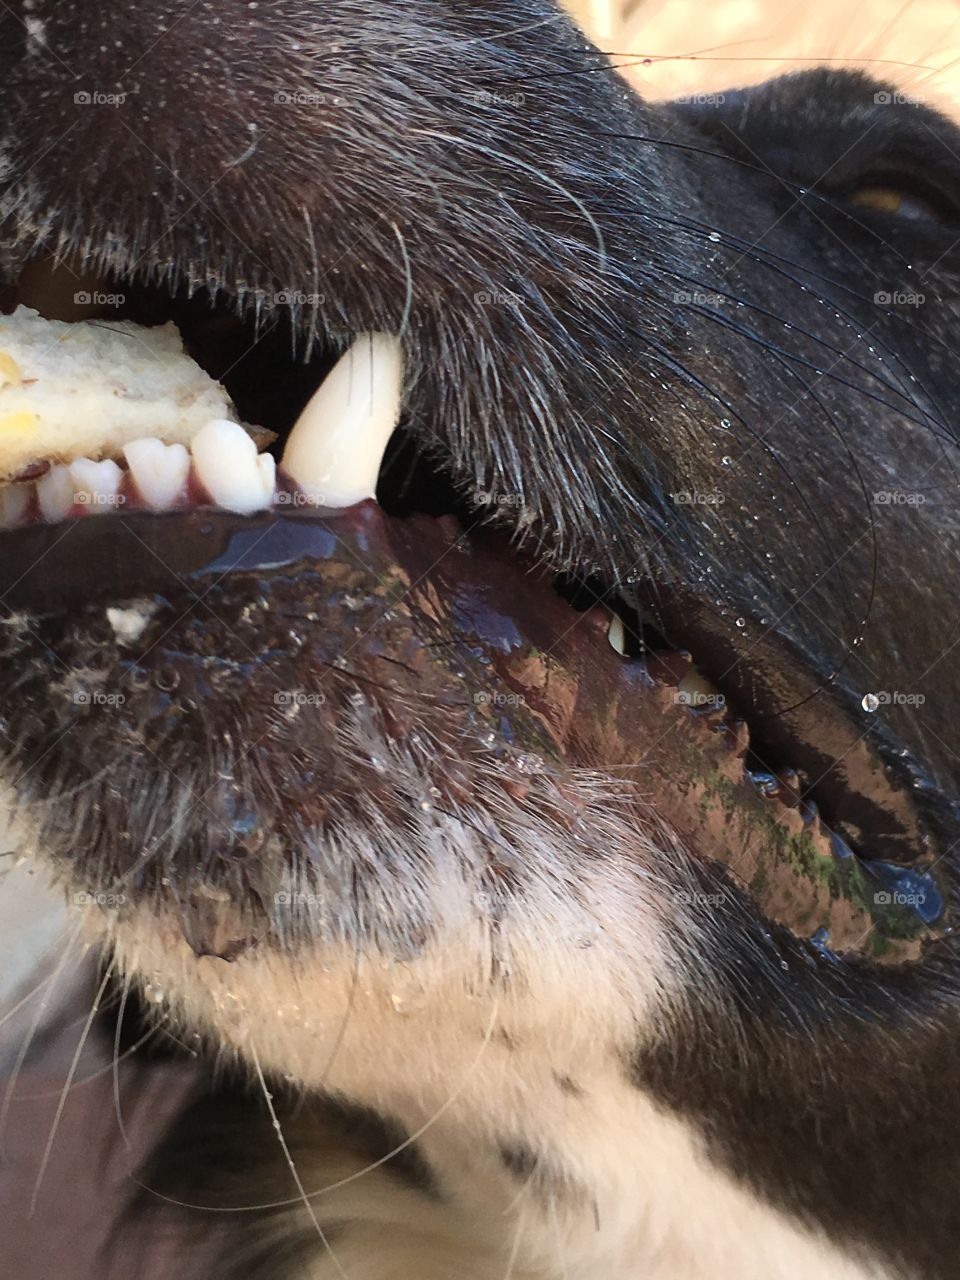 Close up of our border collie, Peter's teeth as he bites down on a treat, he has a gentle mouth despite the fierce-looking choppers!